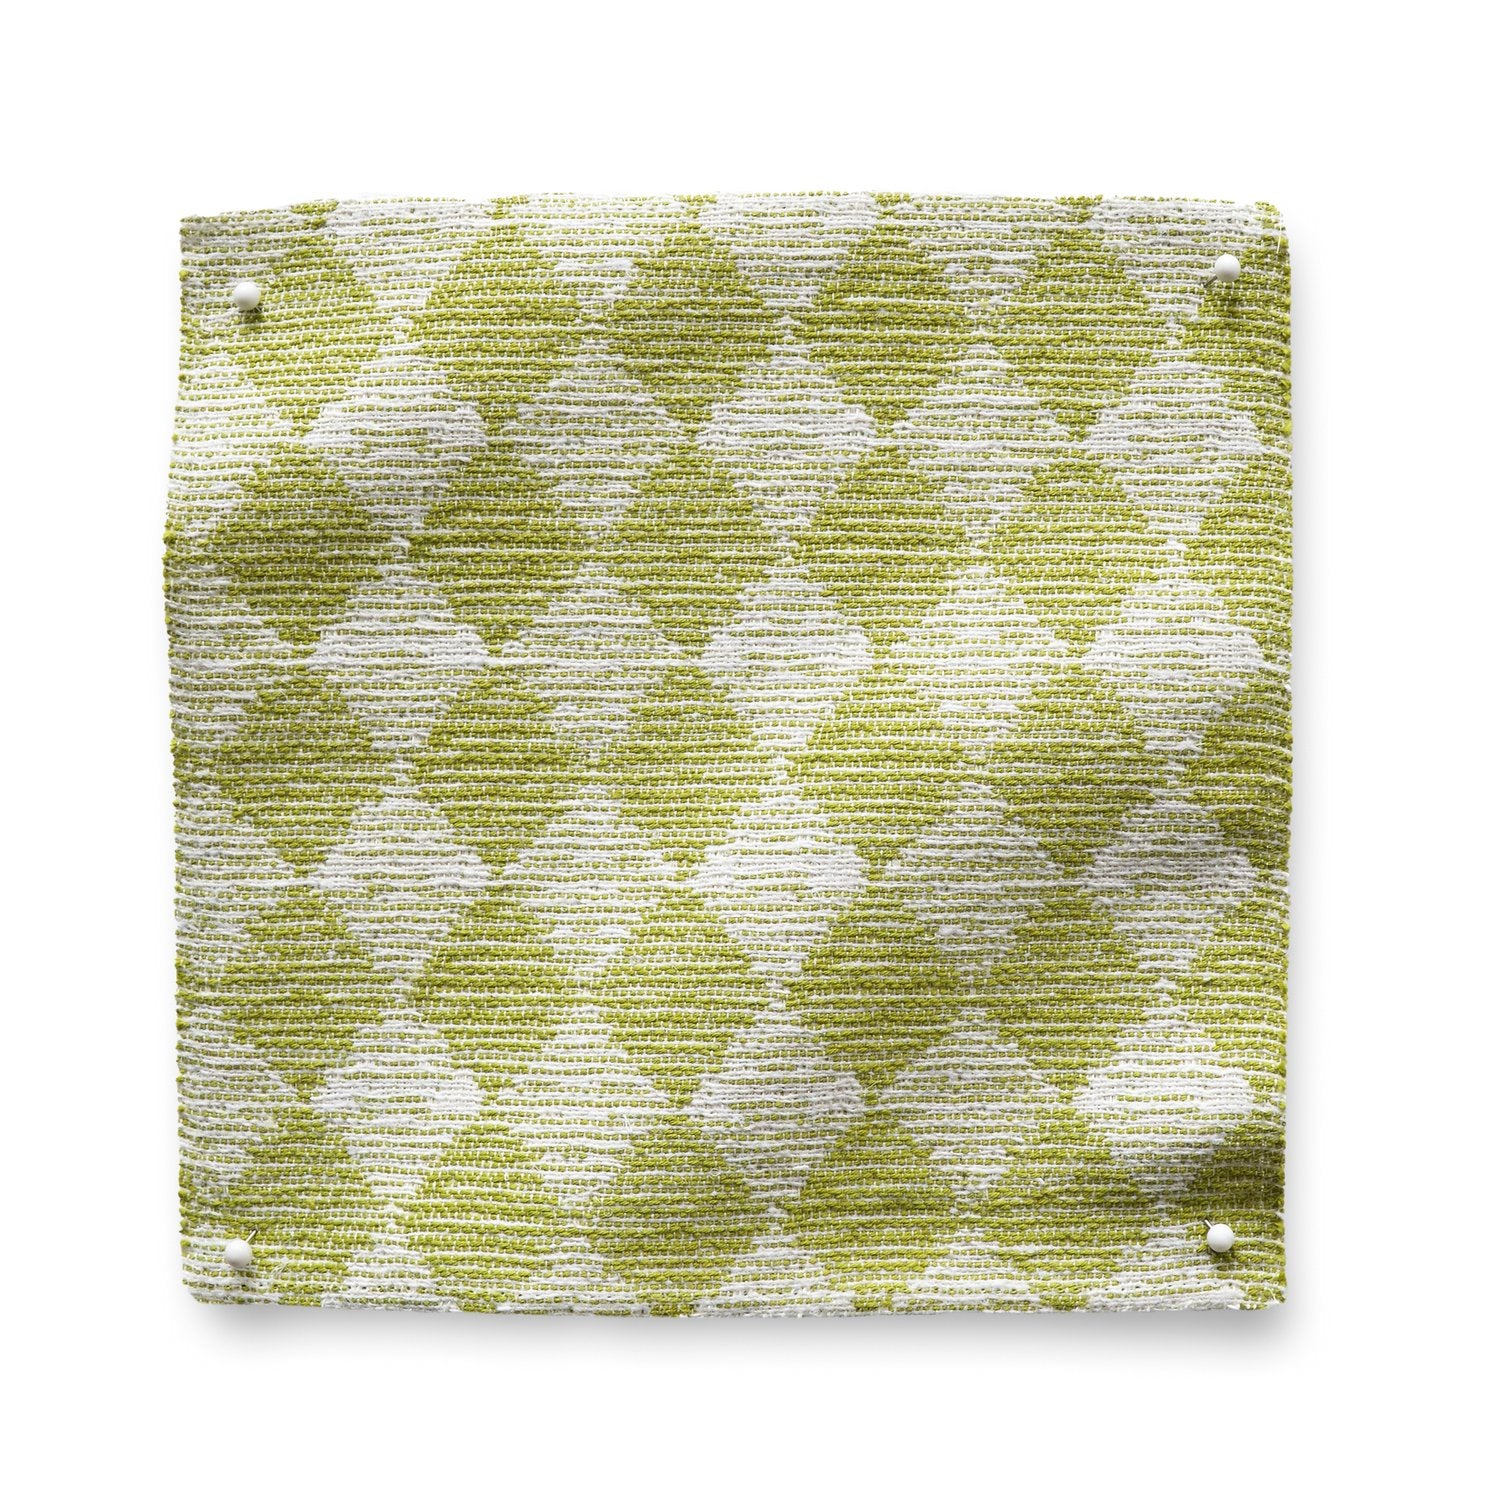 Square fabric swatch in a textural diamond print in lime green and cream.